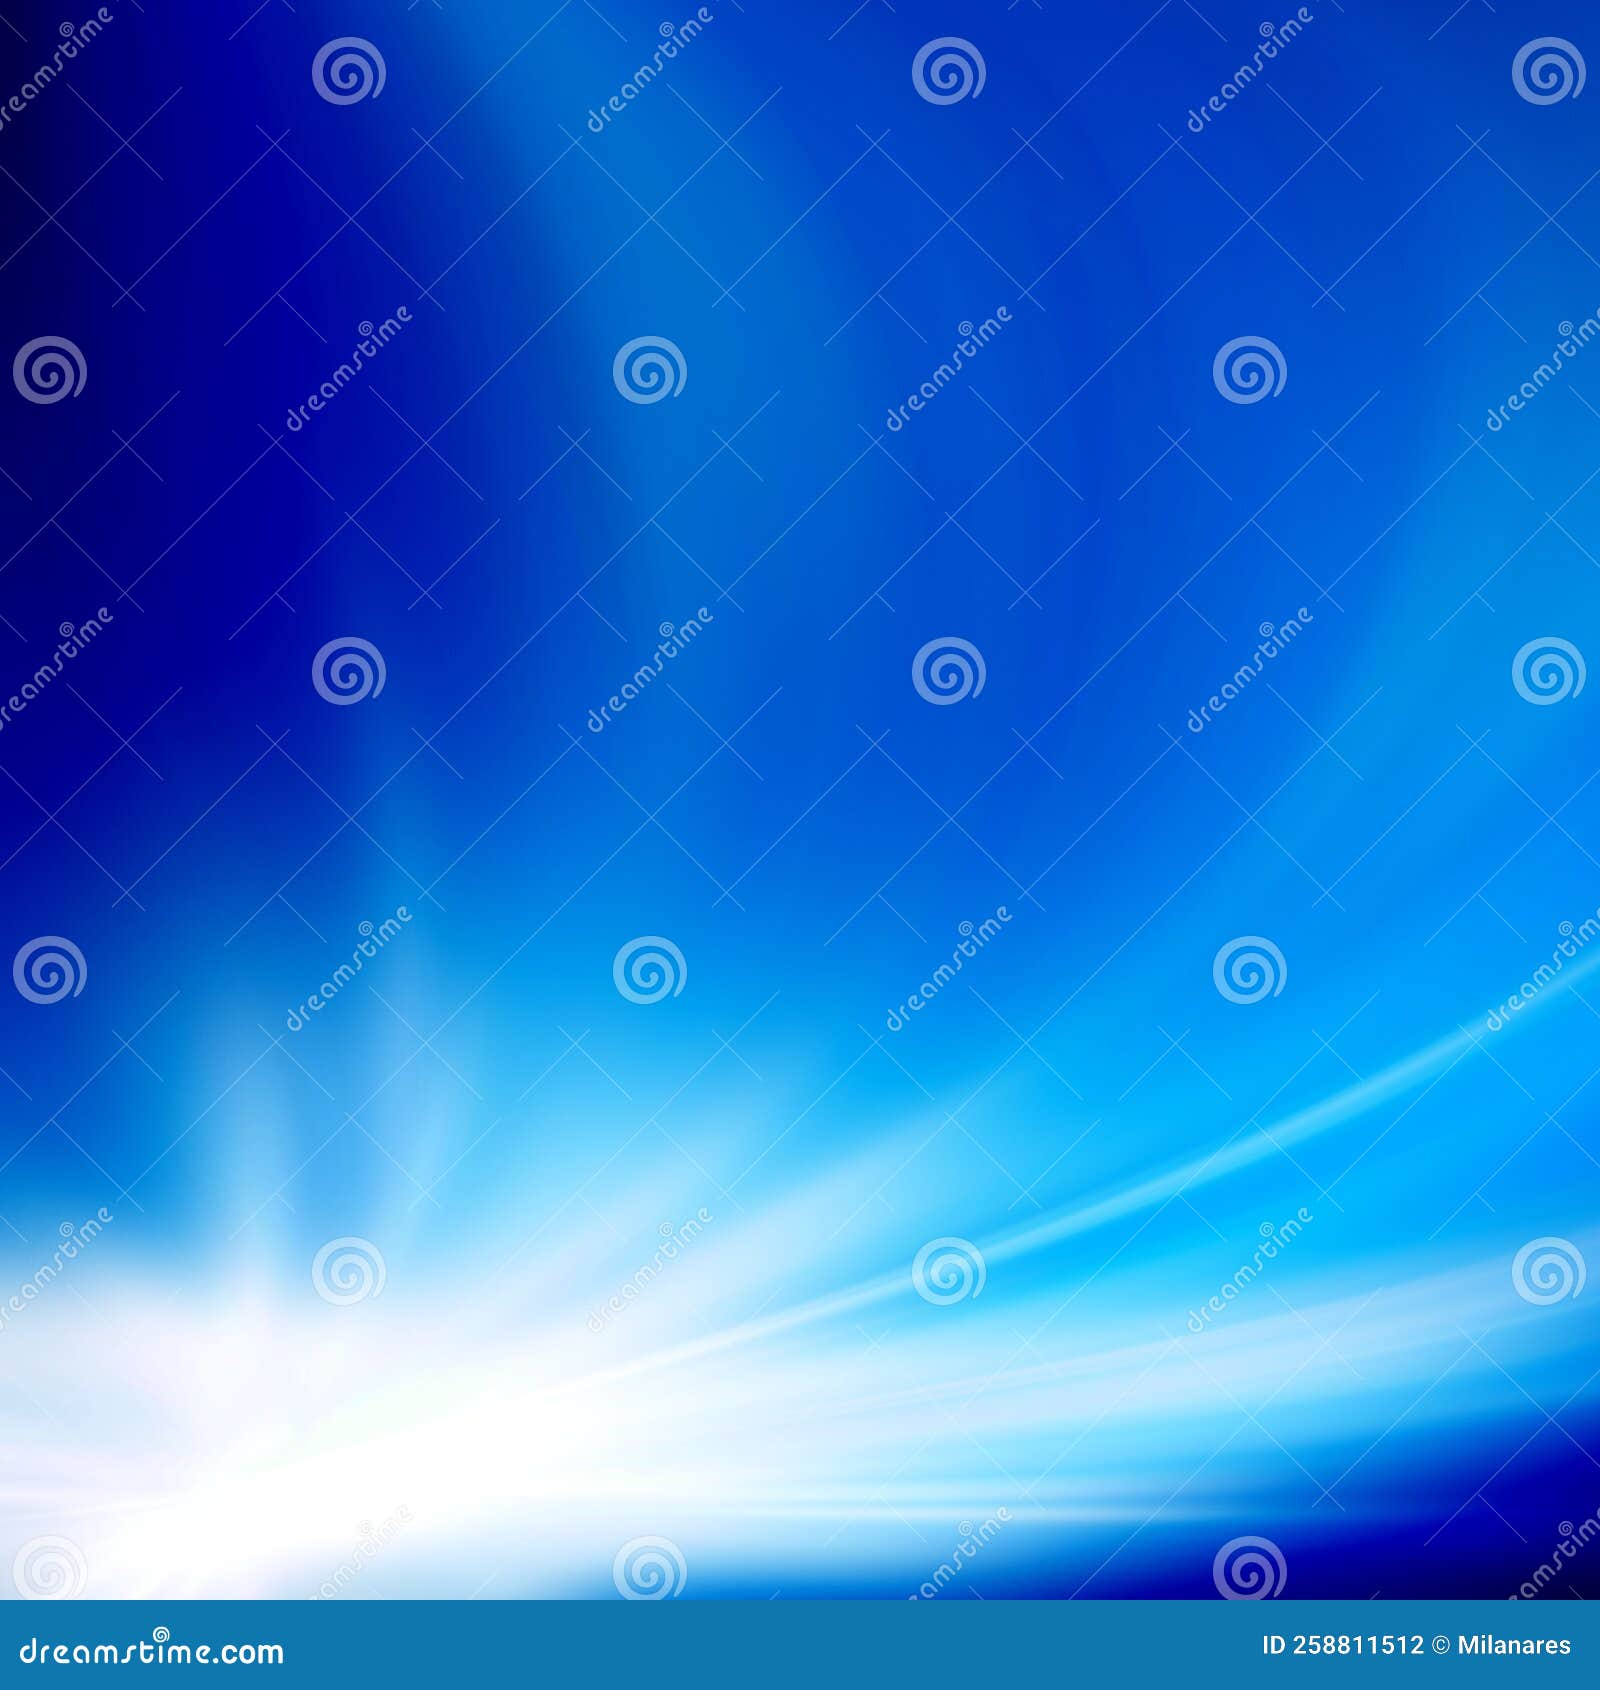 blue sky with glaring sun. abstract background, asymmetric light burst with the center in the upper left third. use of linear and